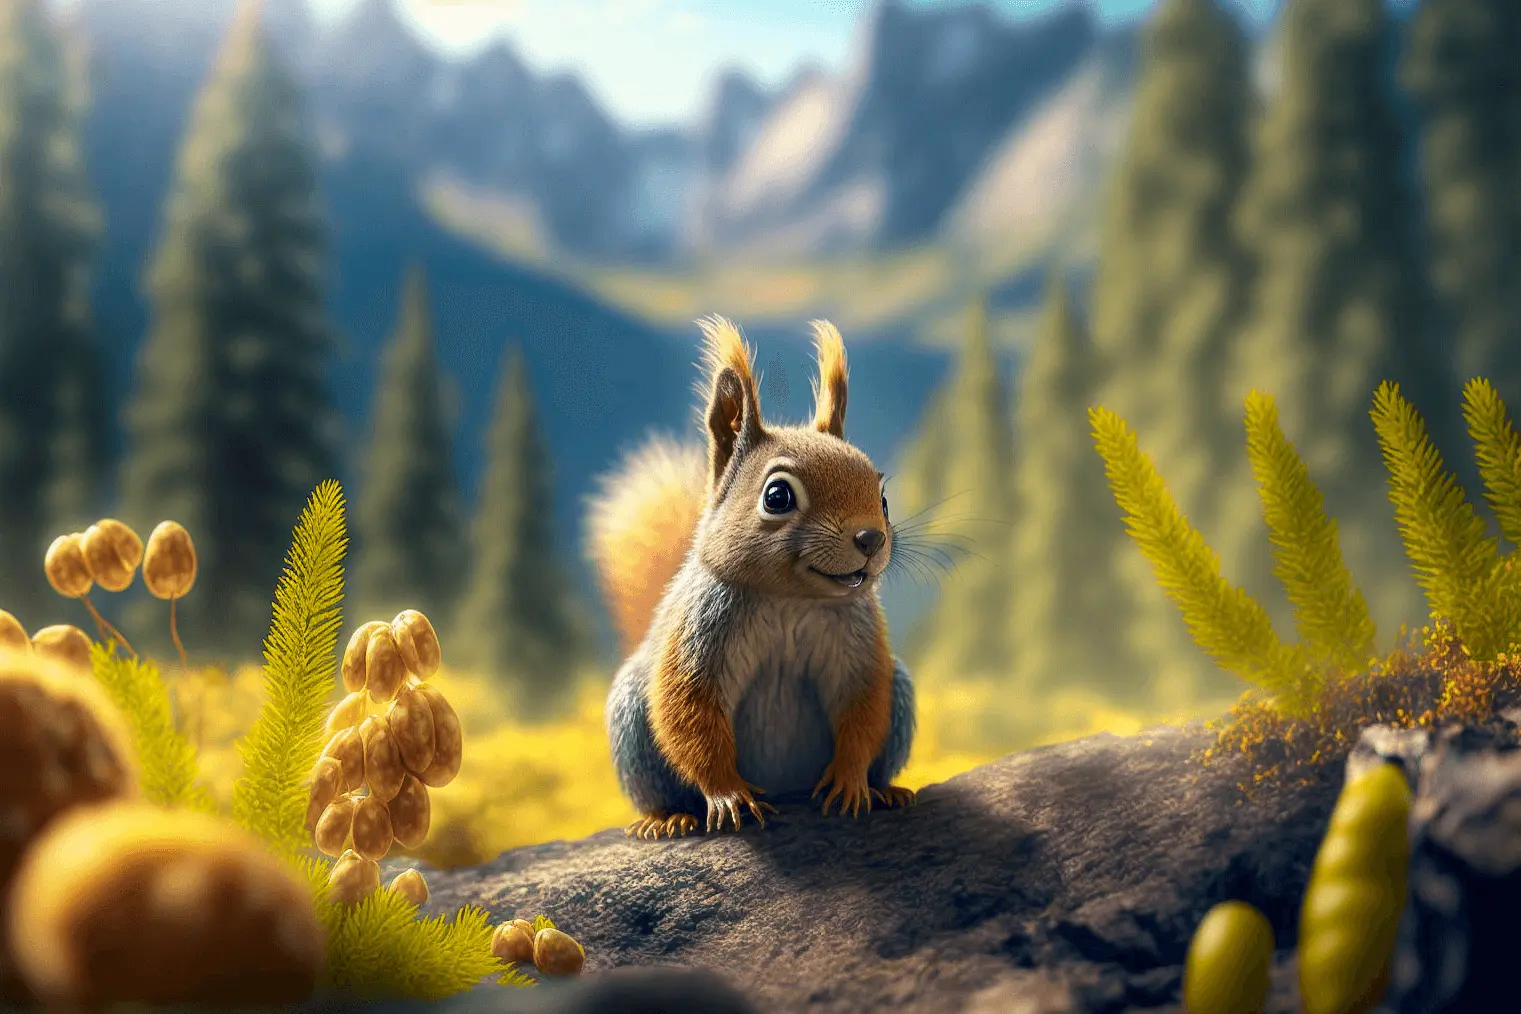 Cute Squirrel Clipart of Illustrated Squirrel on a log in a Woodland with Mountains in Background